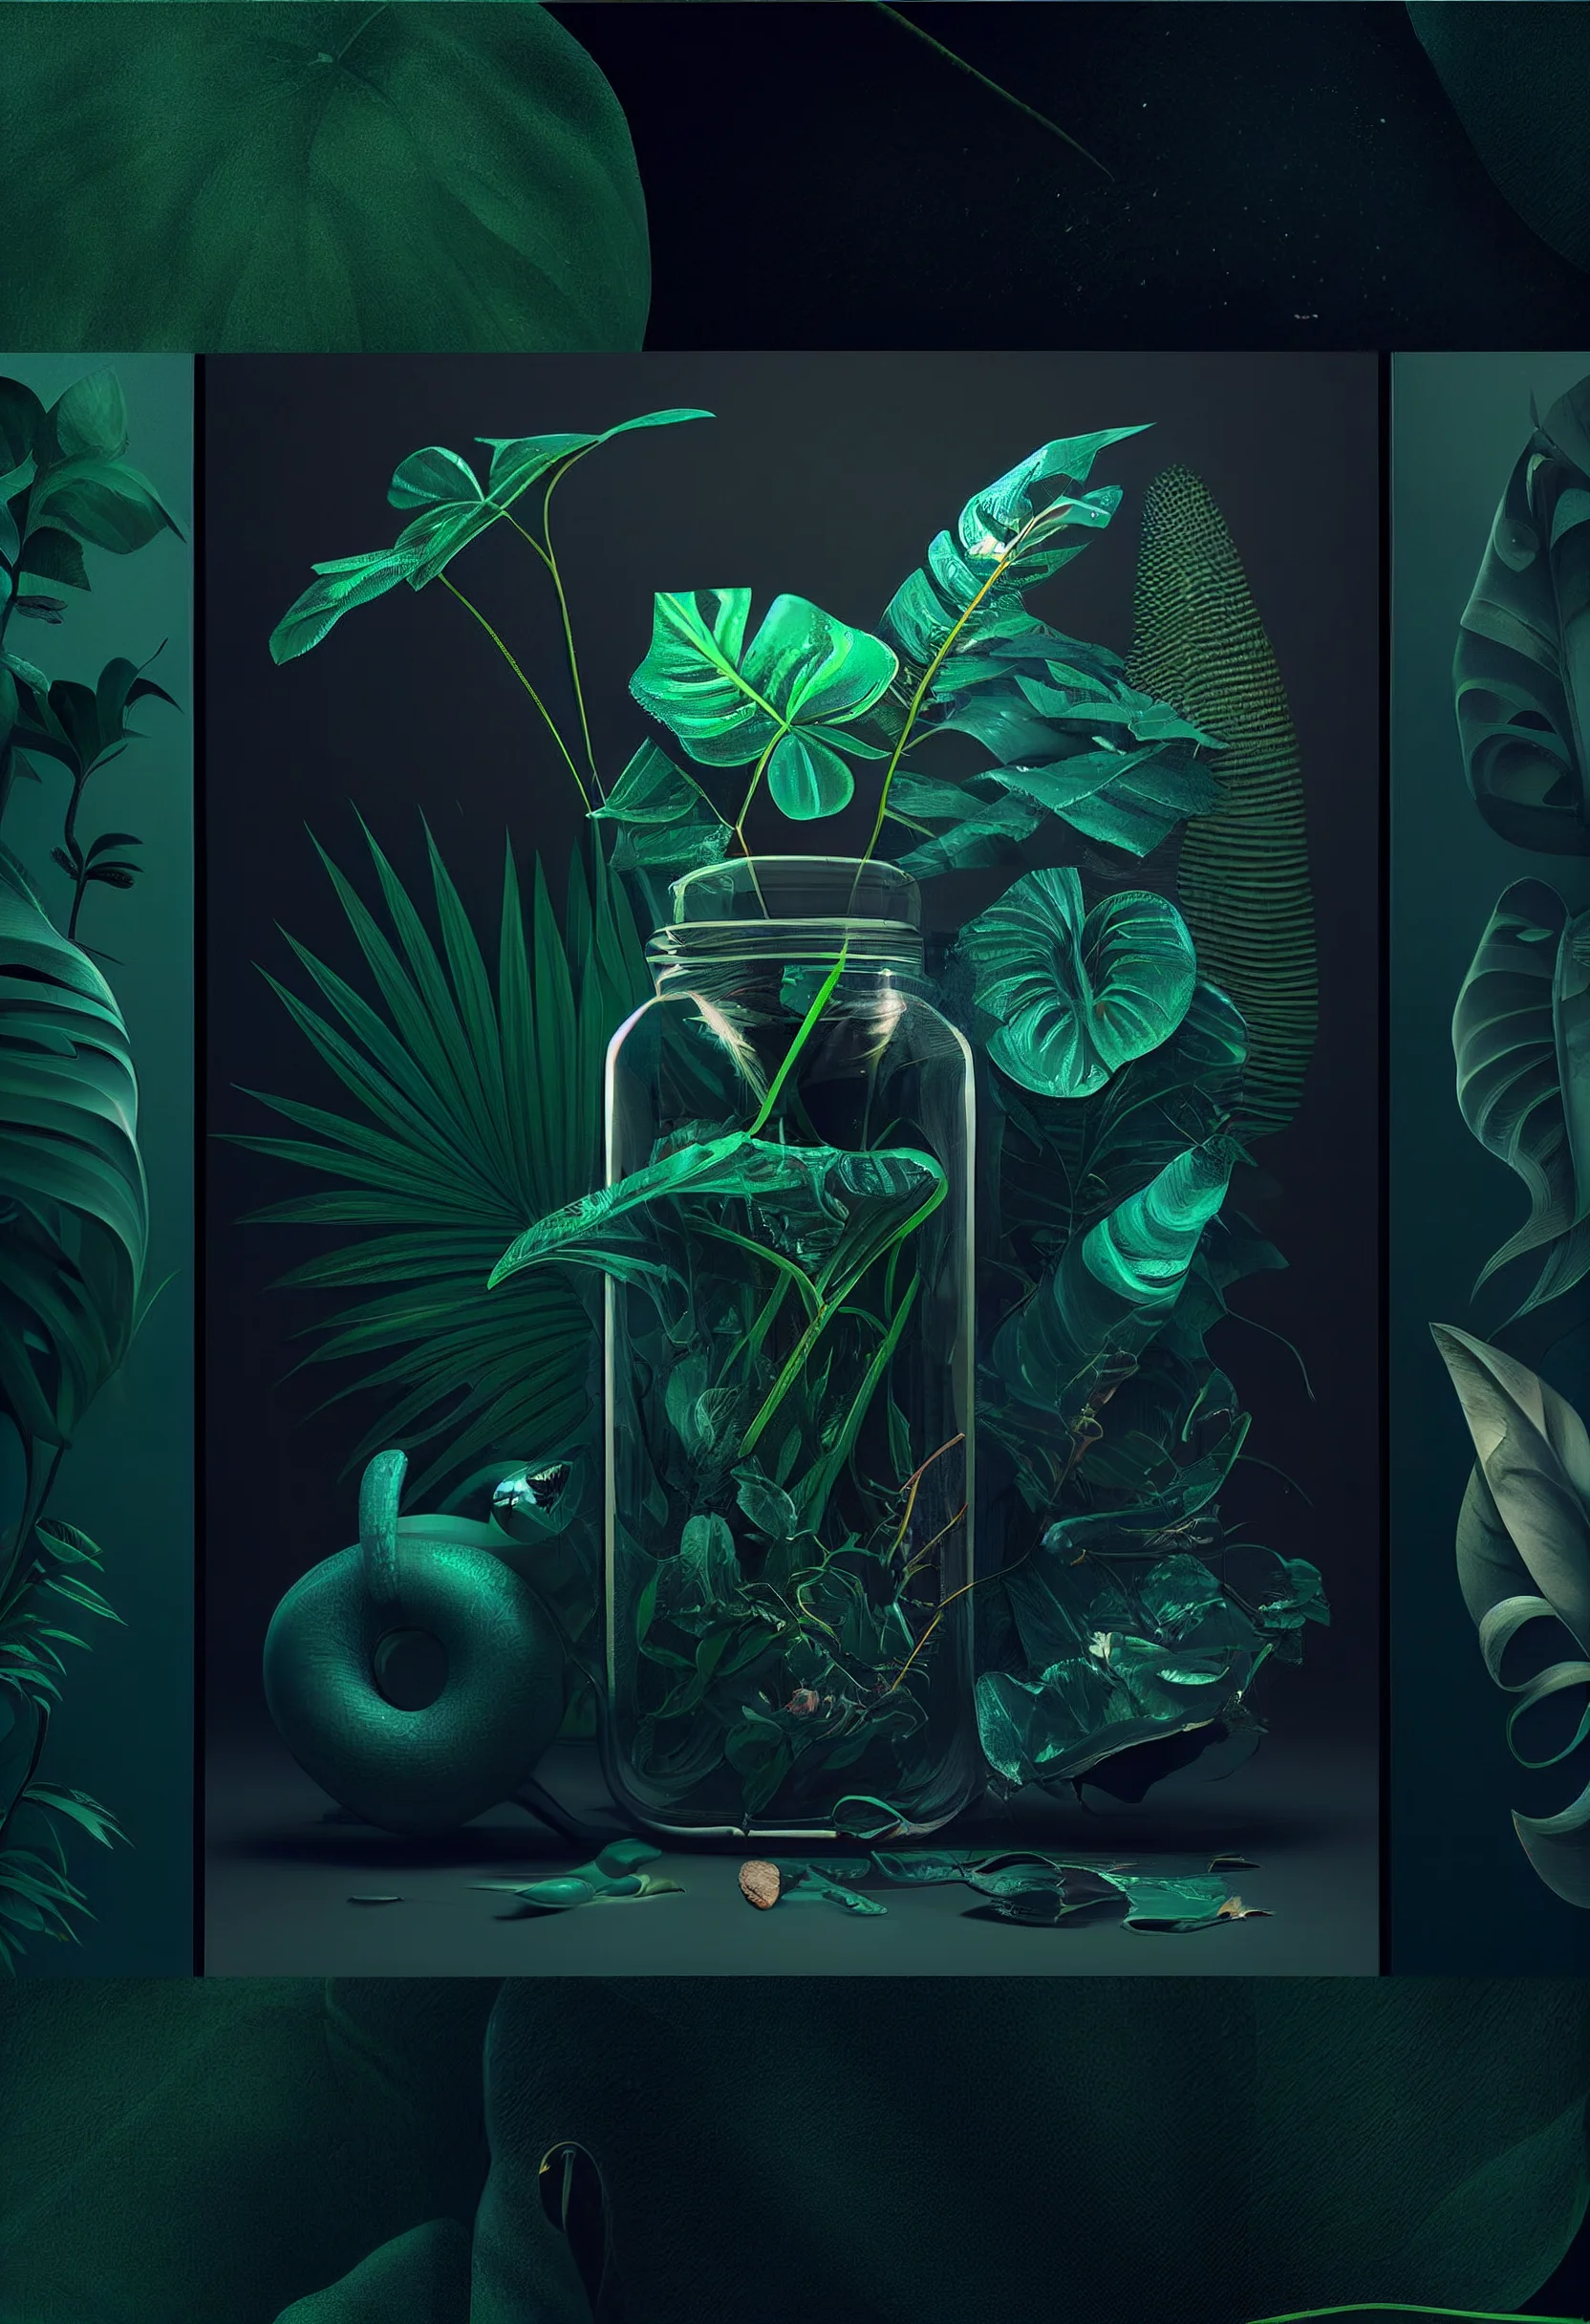 A green snake and green leaves in a glass jar. - Neon green, green